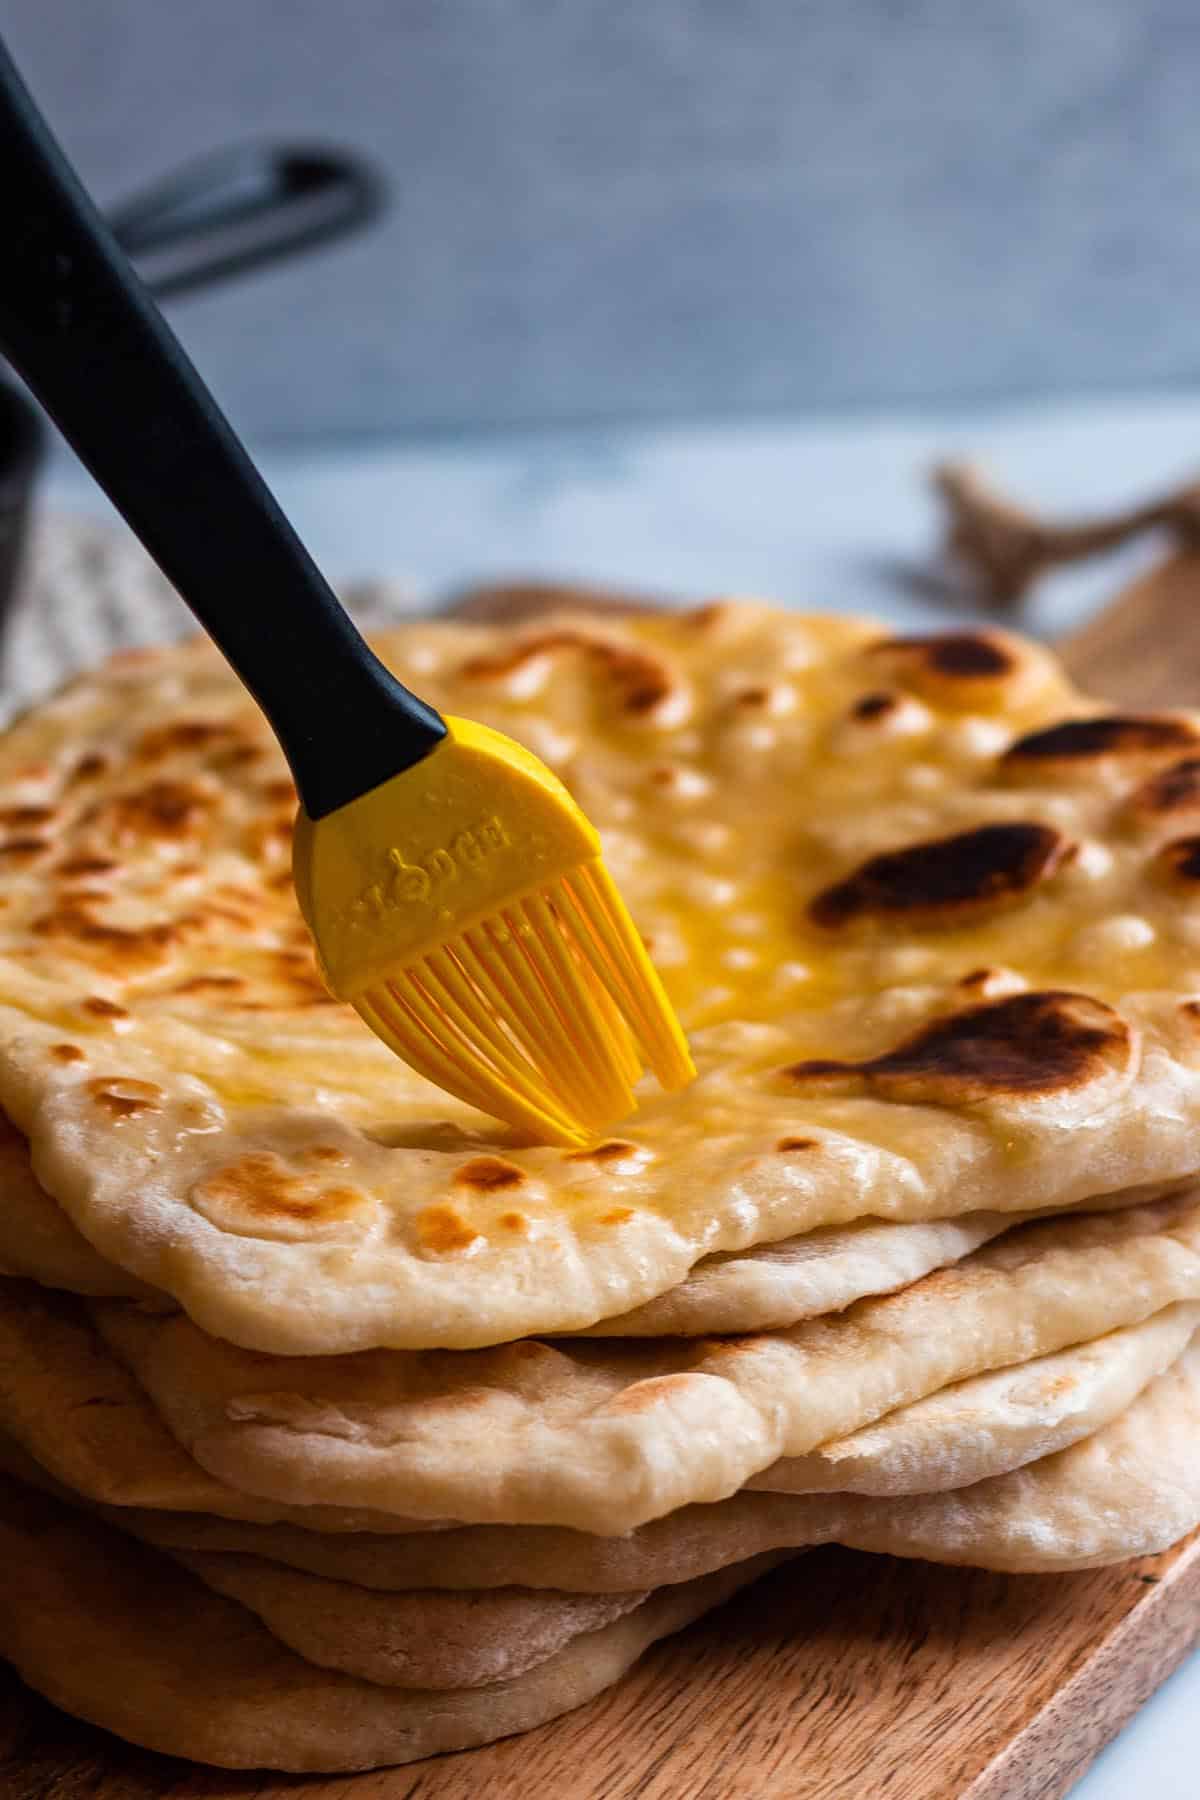 A stack of freshly cooked sourdough naan with a brush spreading on melted butter.